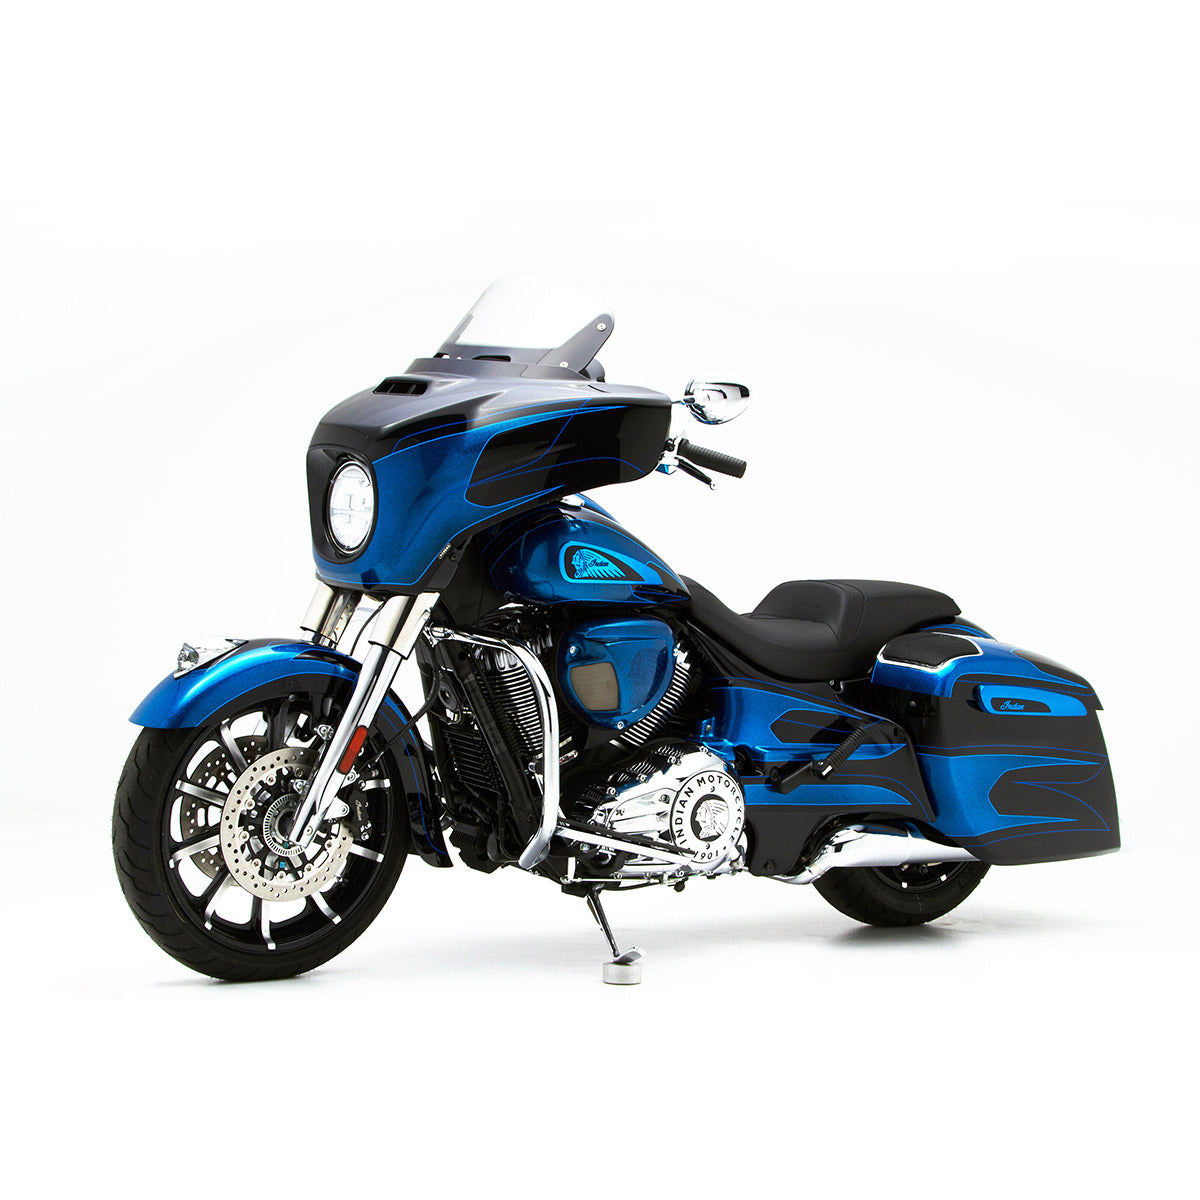 Reytelo Air Cleaner Cover for Indian® motorcycles shown on 2019 Chieftain